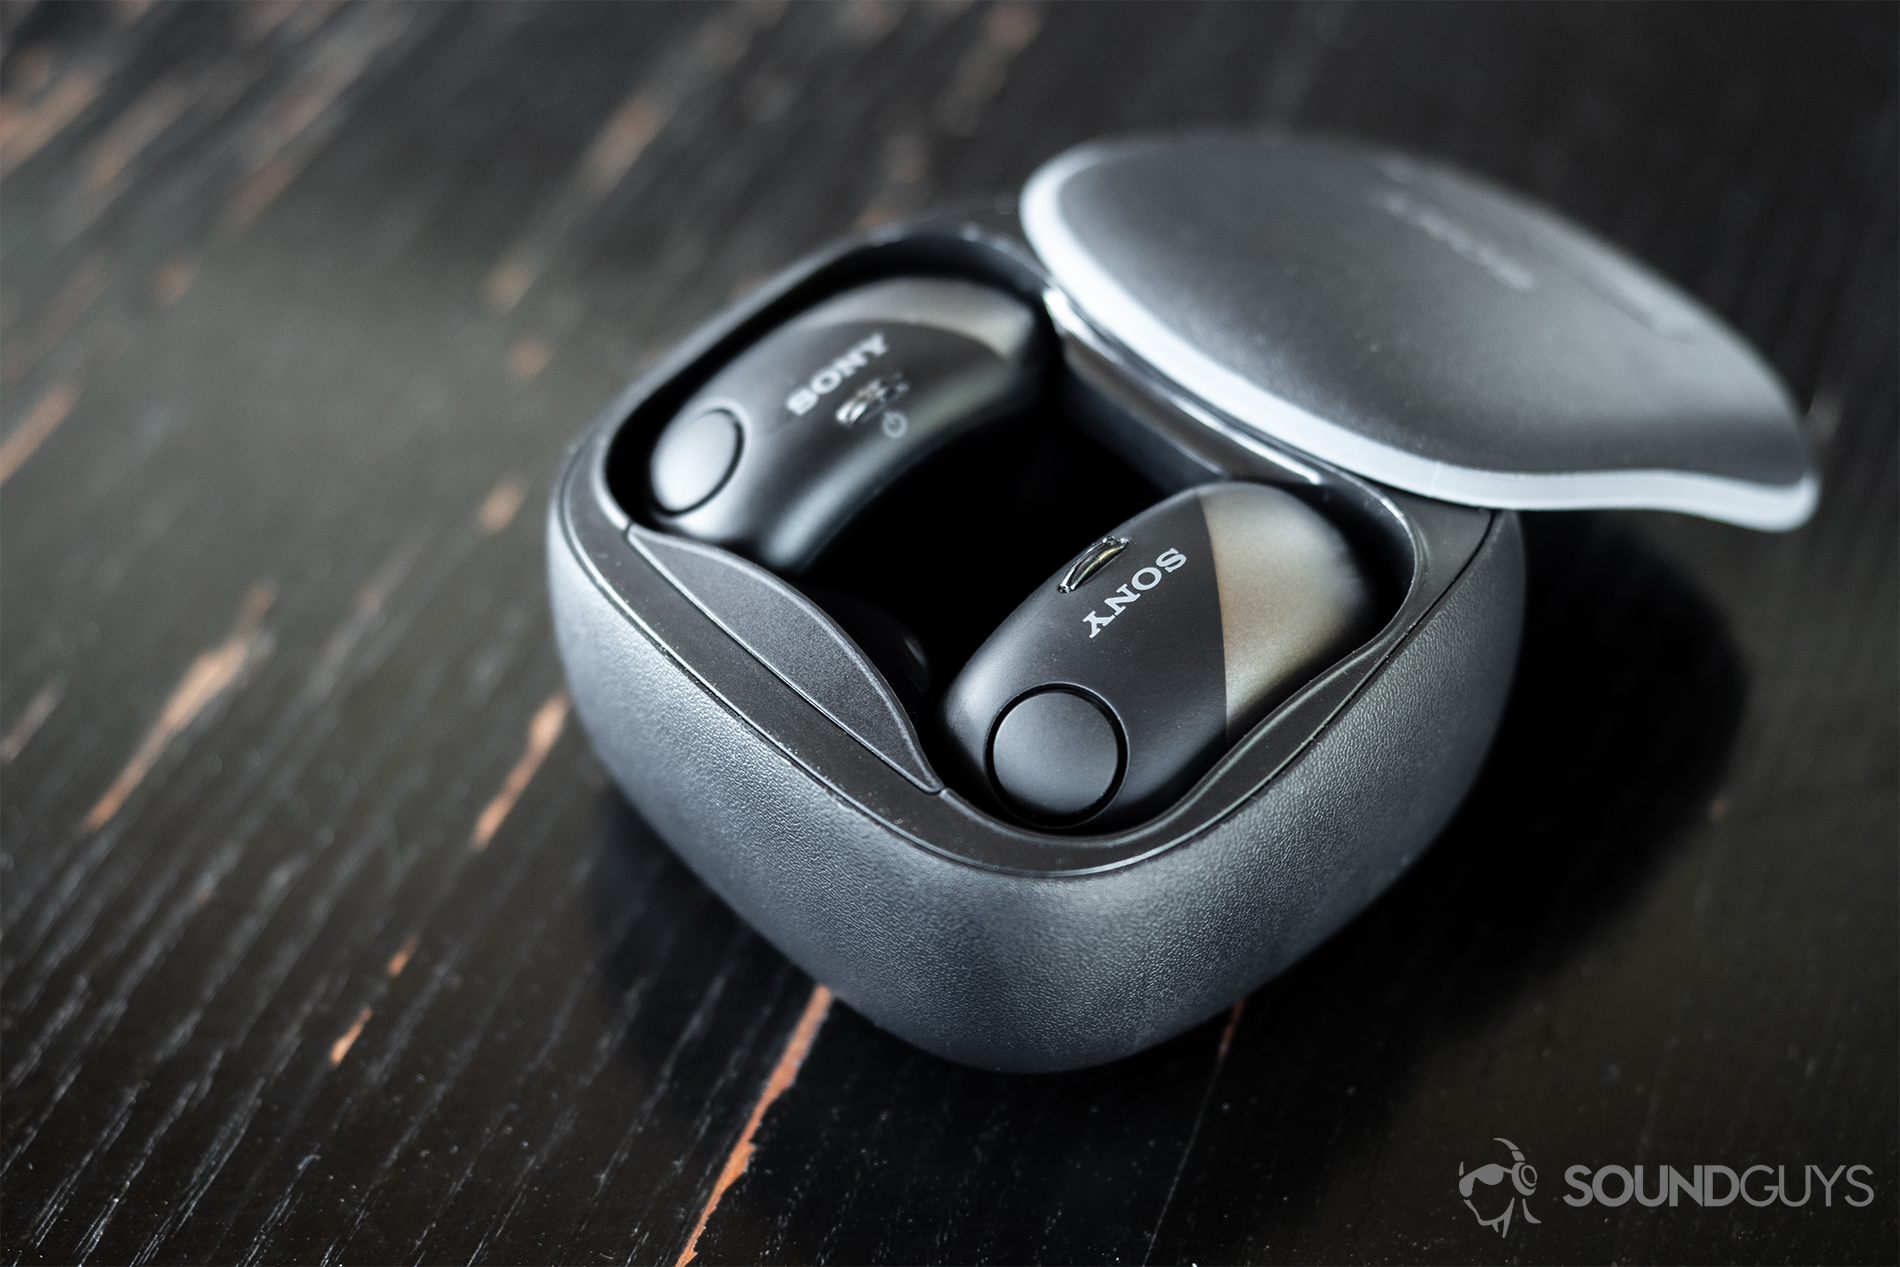 Sony WF-SP700N: A downward facing image of both true wireless earbuds docked in the charging case on a rustic, black wood surface.